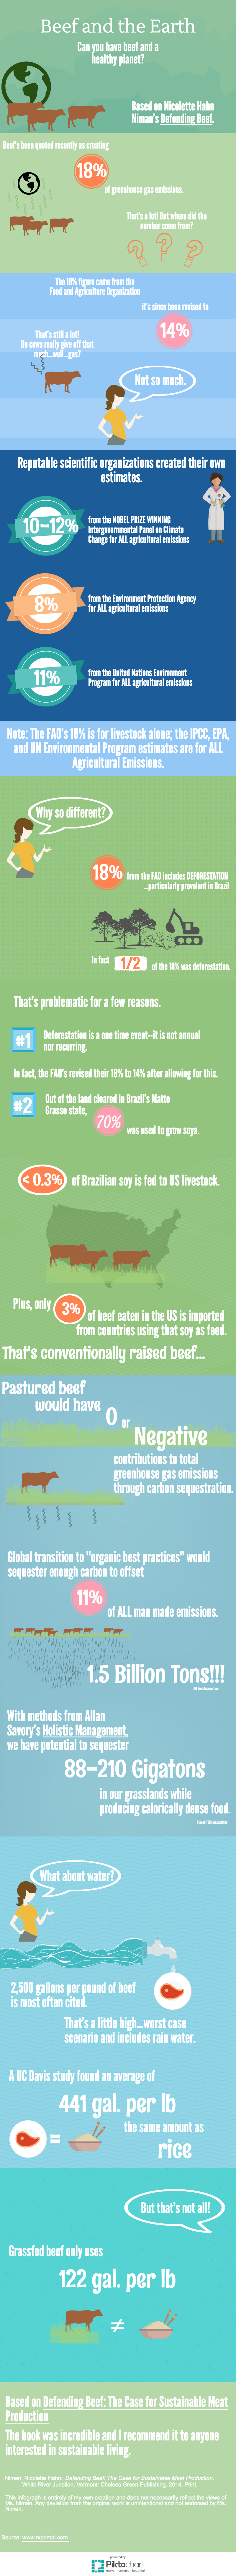 beef-and-the-earth